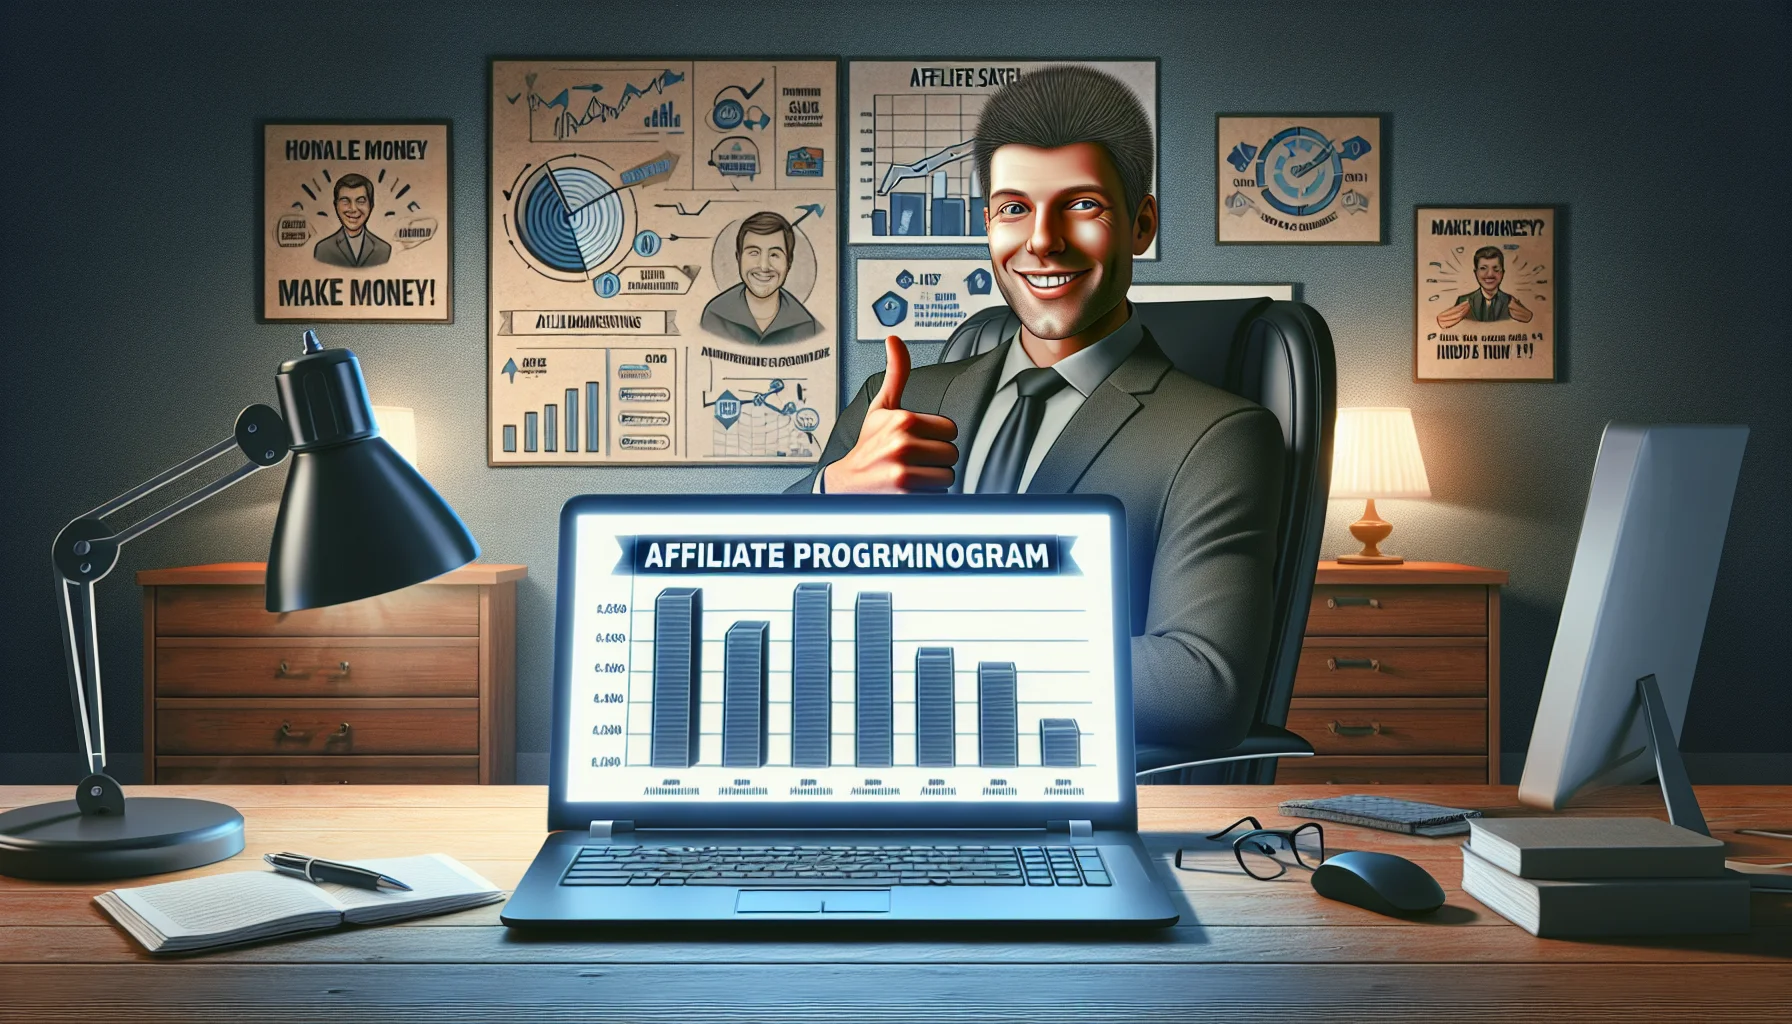 Create a humorous, lifelike image of a digital workspace where an affiliate marketing program is being portrayed. The environment includes a modern laptop displaying charts of increasing affiliate sales, indicating the potential for making money online. A caricature of a person of Caucasian descent with a pleasant smile is sitting at the desk, giving thumbs up. The surroundings are furnished with a comfortable office chair, a lamp, and inspiring posters related to online business, providing a subtle nudge towards joining the affiliate program.